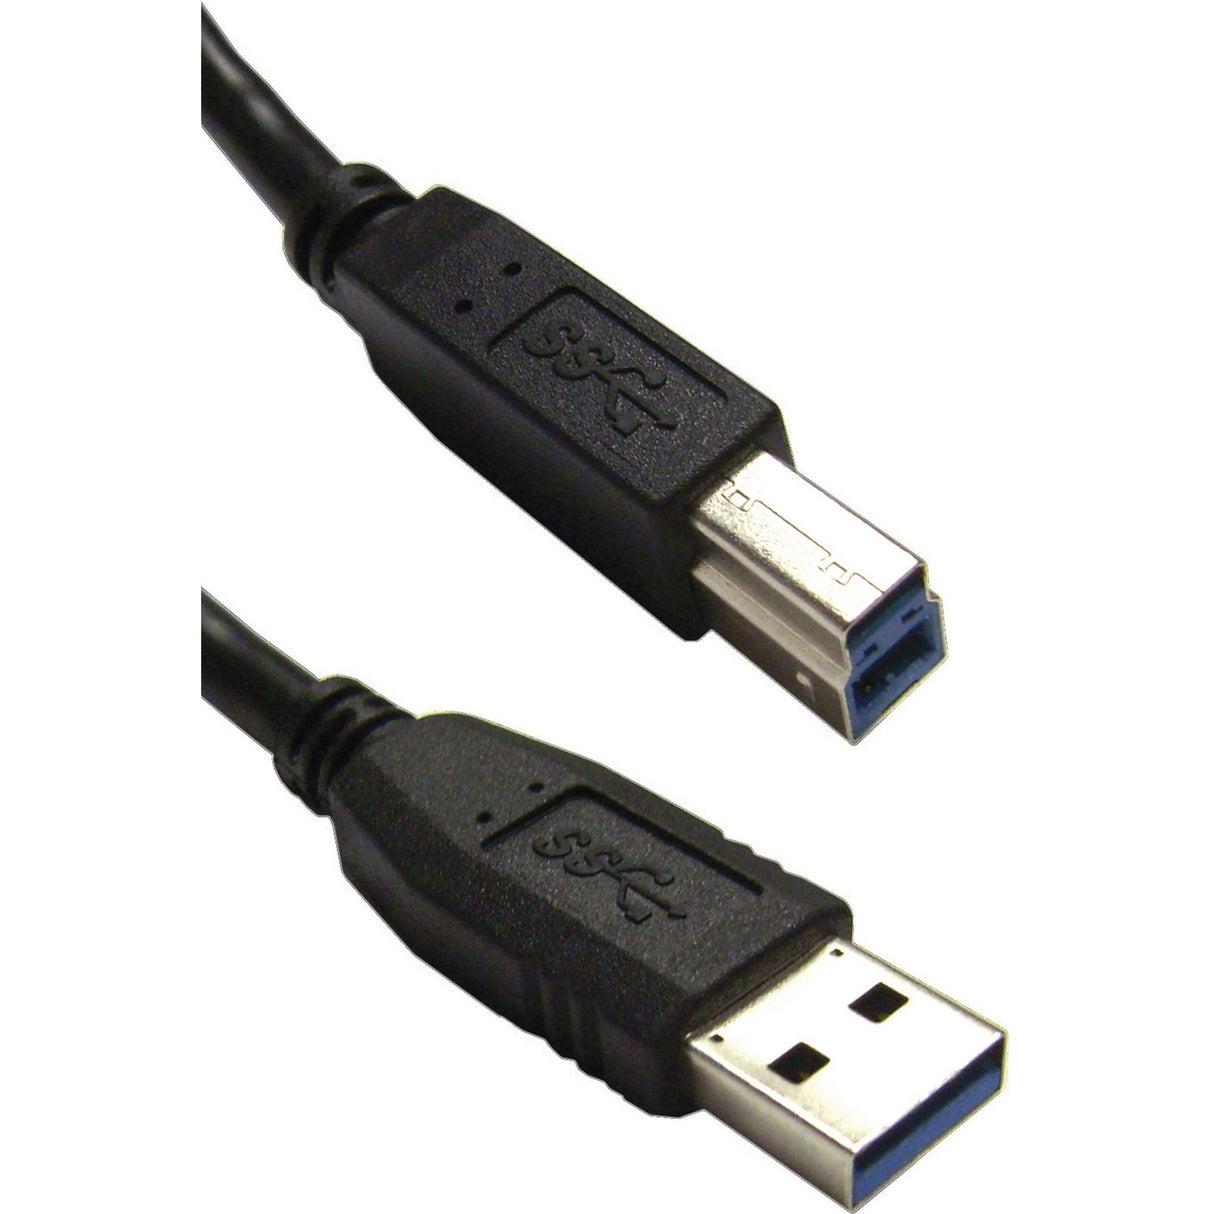 Connectronics USB3-AB-2M USB 3.0 A Male to B Male Cable 2 Meter, 6-Foot